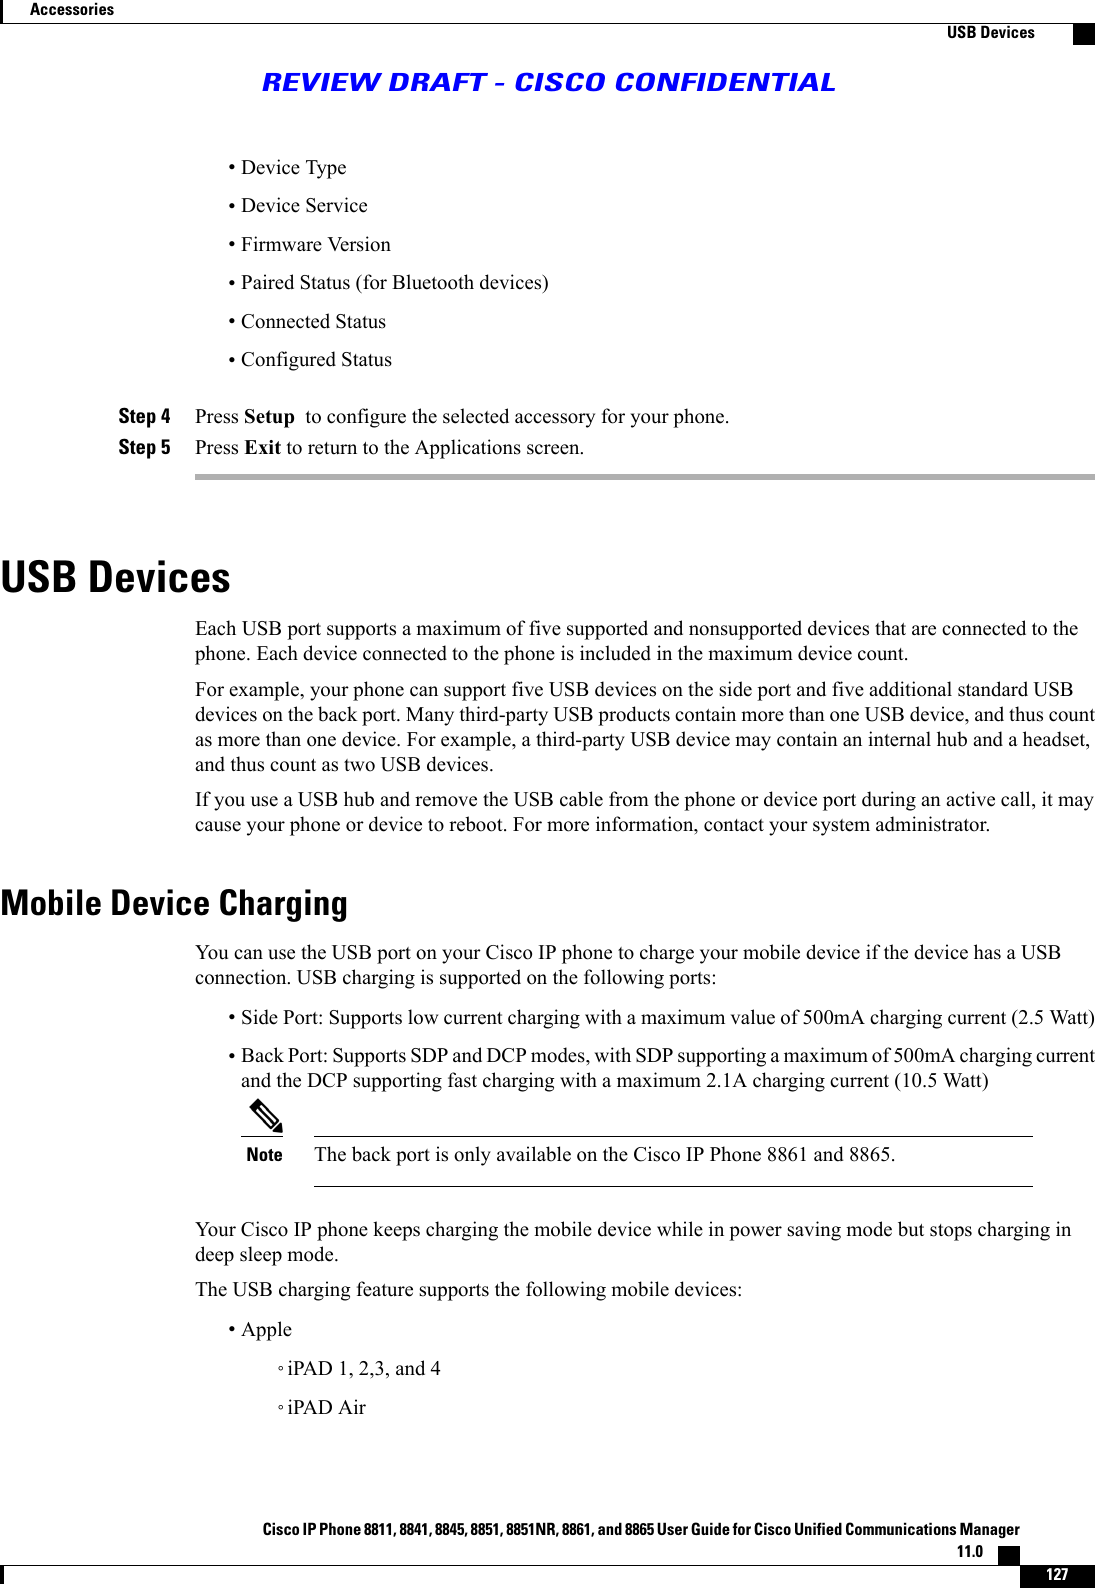 •Device Type•Device Service•Firmware Version•Paired Status (for Bluetooth devices)•Connected Status•Configured StatusStep 4 Press Setup to configure the selected accessory for your phone.Step 5 Press Exit to return to the Applications screen.USB DevicesEach USB port supports a maximum of five supported and nonsupported devices that are connected to thephone. Each device connected to the phone is included in the maximum device count.For example, your phone can support five USB devices on the side port and five additional standard USBdevices on the back port. Many third-party USB products contain more than one USB device, and thus countas more than one device. For example, a third-party USB device may contain an internal hub and a headset,and thus count as two USB devices.If you use a USB hub and remove the USB cable from the phone or device port during an active call, it maycause your phone or device to reboot. For more information, contact your system administrator.Mobile Device ChargingYou can use the USB port on your Cisco IP phone to charge your mobile device if the device has a USBconnection. USB charging is supported on the following ports:•Side Port: Supports low current charging with a maximum value of 500mA charging current (2.5 Watt)•Back Port: Supports SDP and DCP modes, with SDP supporting a maximum of 500mA charging currentand the DCP supporting fast charging with a maximum 2.1A charging current (10.5 Watt)The back port is only available on the Cisco IP Phone 8861 and 8865.NoteYour Cisco IP phone keeps charging the mobile device while in power saving mode but stops charging indeep sleep mode.The USB charging feature supports the following mobile devices:•Apple◦iPAD 1, 2,3, and 4◦iPAD AirCisco IP Phone 8811, 8841, 8845, 8851, 8851NR, 8861, and 8865 User Guide for Cisco Unified Communications Manager11.0    127AccessoriesUSB DevicesREVIEW DRAFT - CISCO CONFIDENTIAL